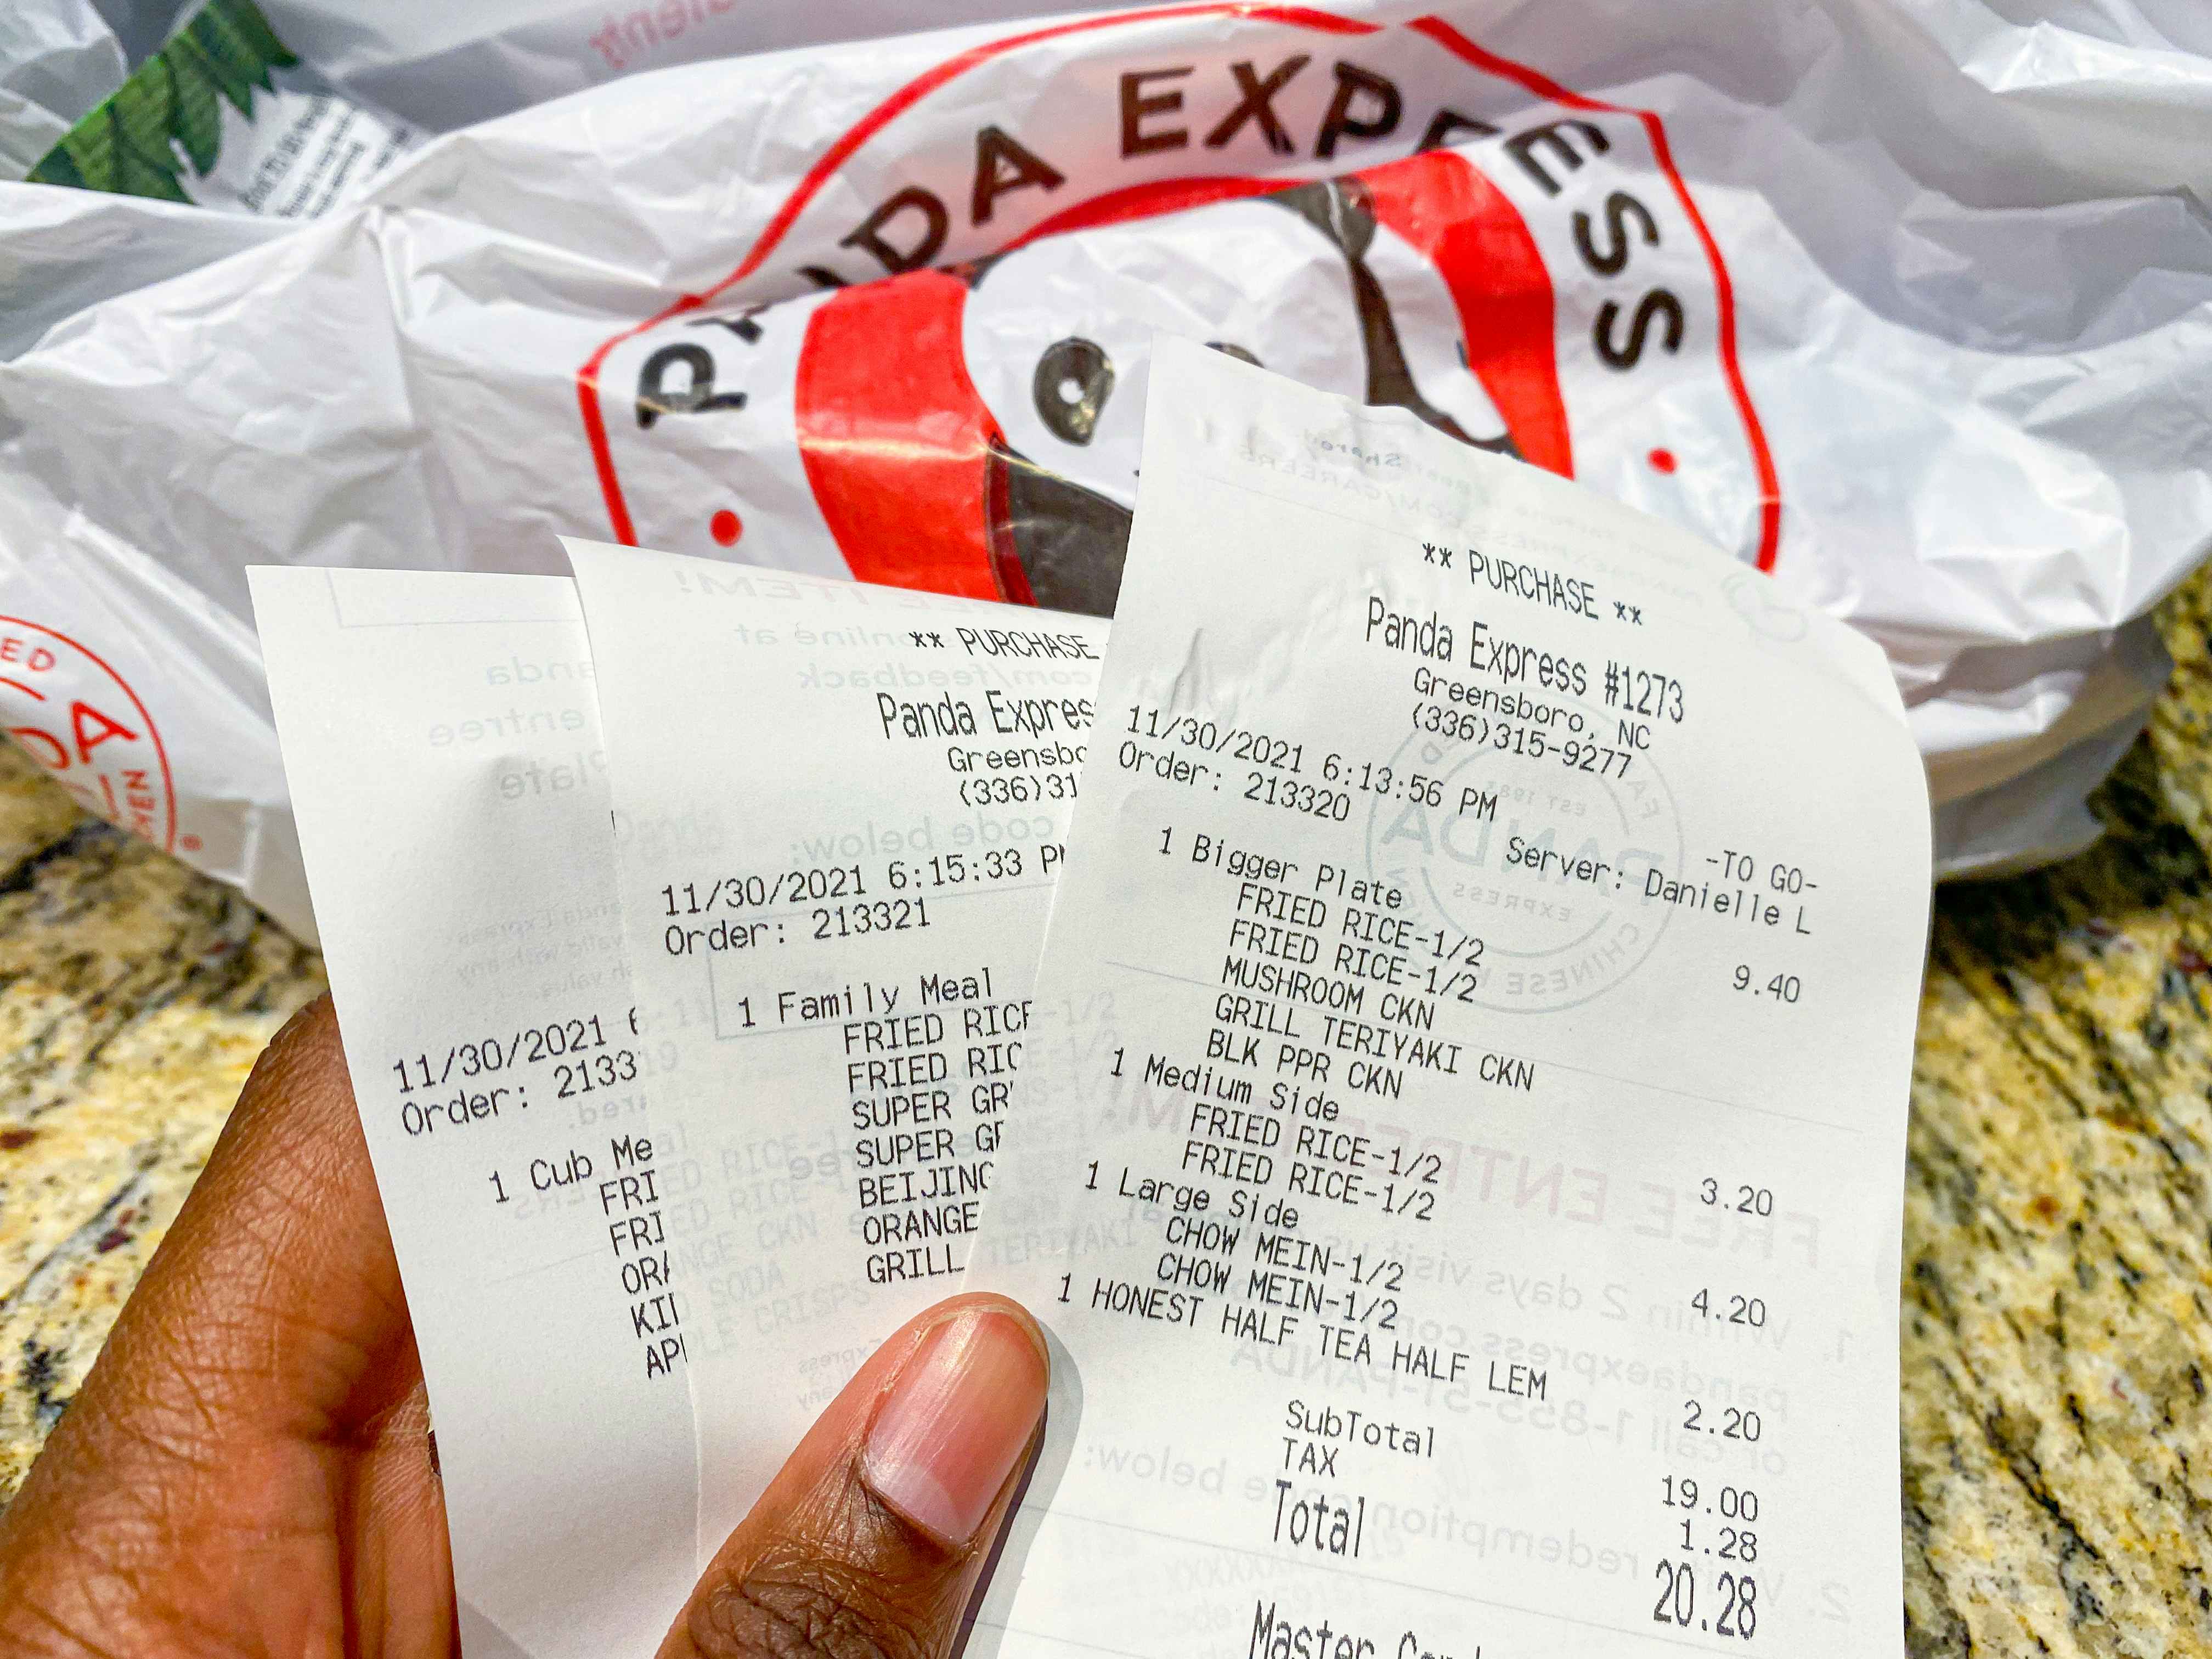 Someone holding three receipts in front of a Panda Express bag